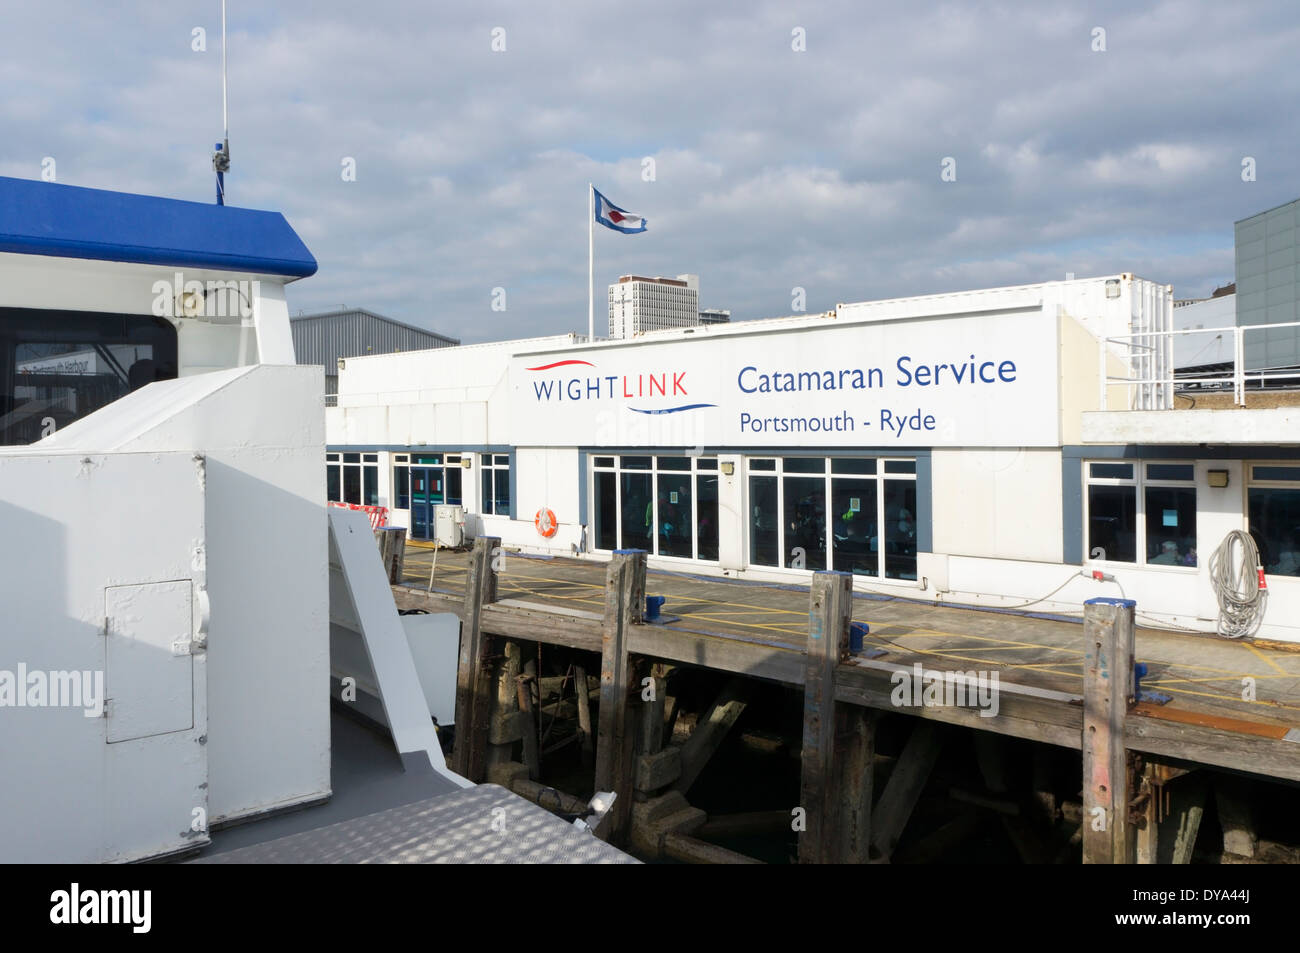 Pier in Portsmouth Harbour for Wightlink Catamaran Service between Portsmouth and Ryde Stock Photo